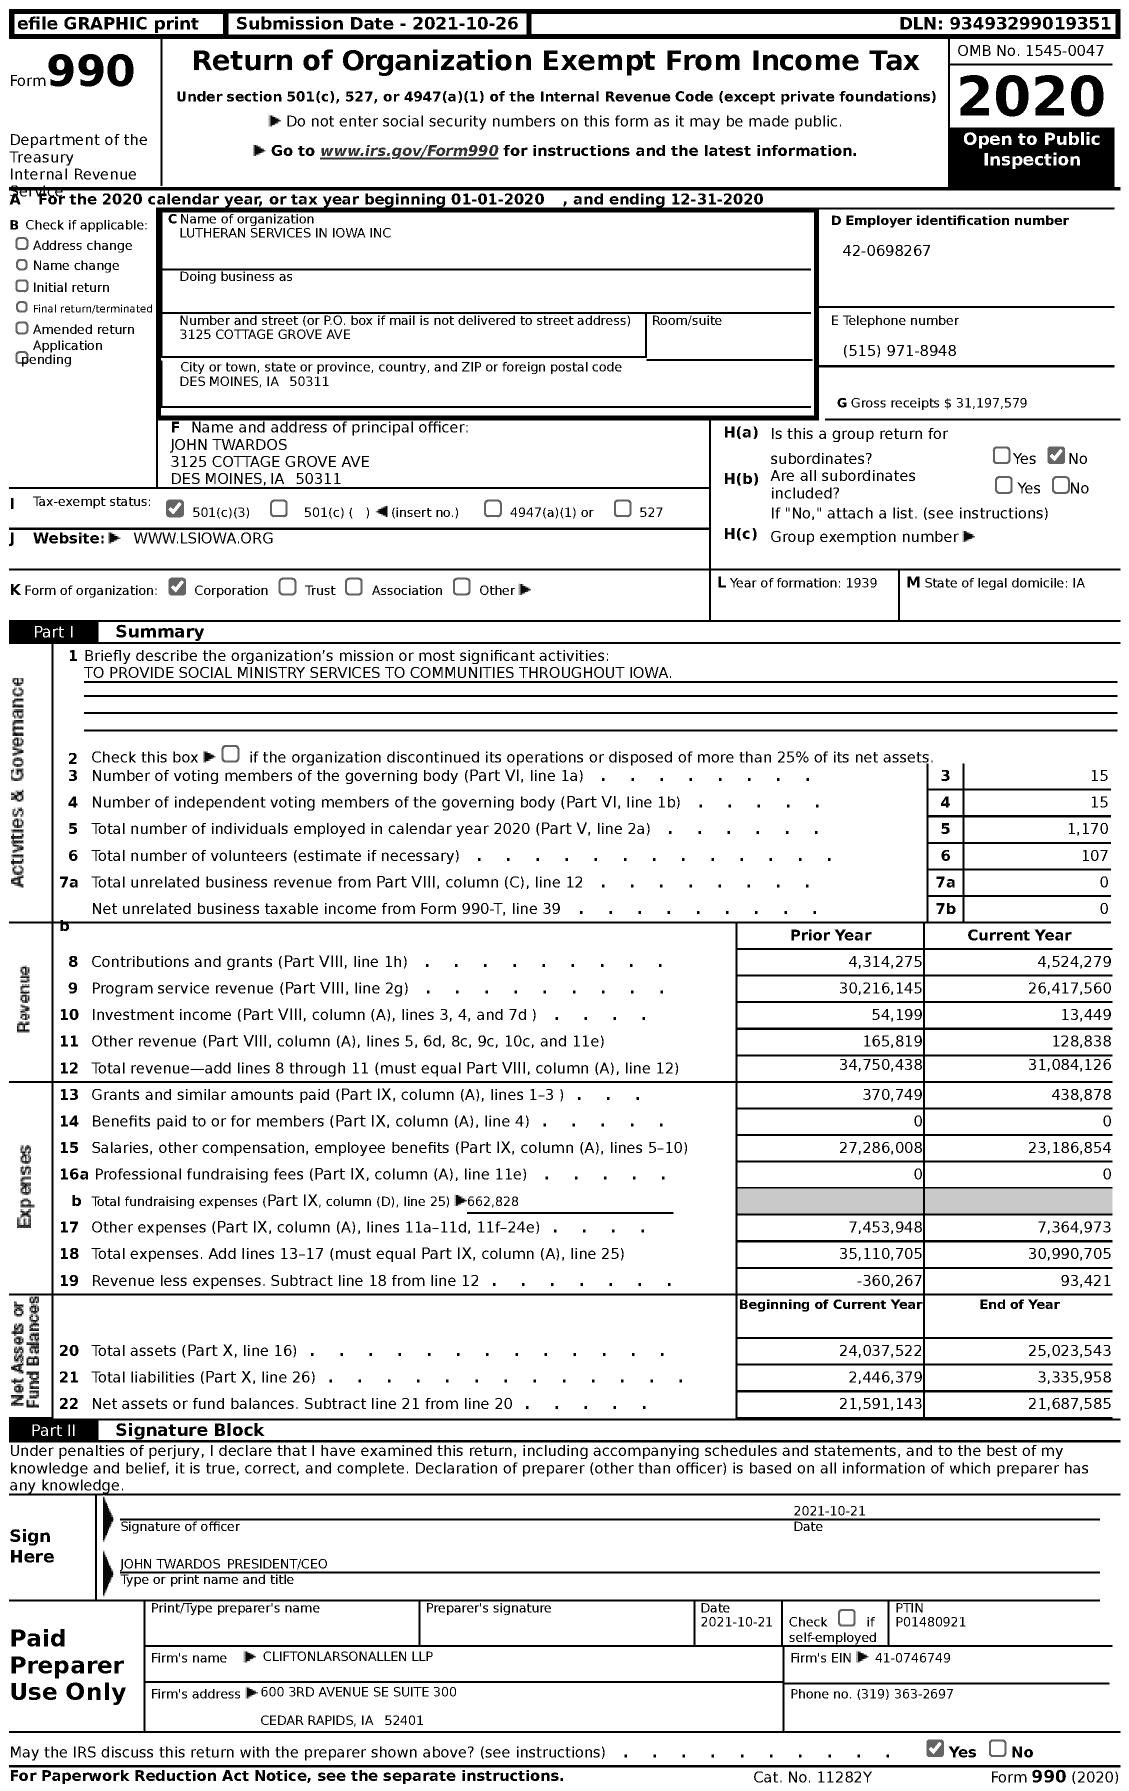 Image of first page of 2020 Form 990 for Lutheran Services in Iowa (LSI)